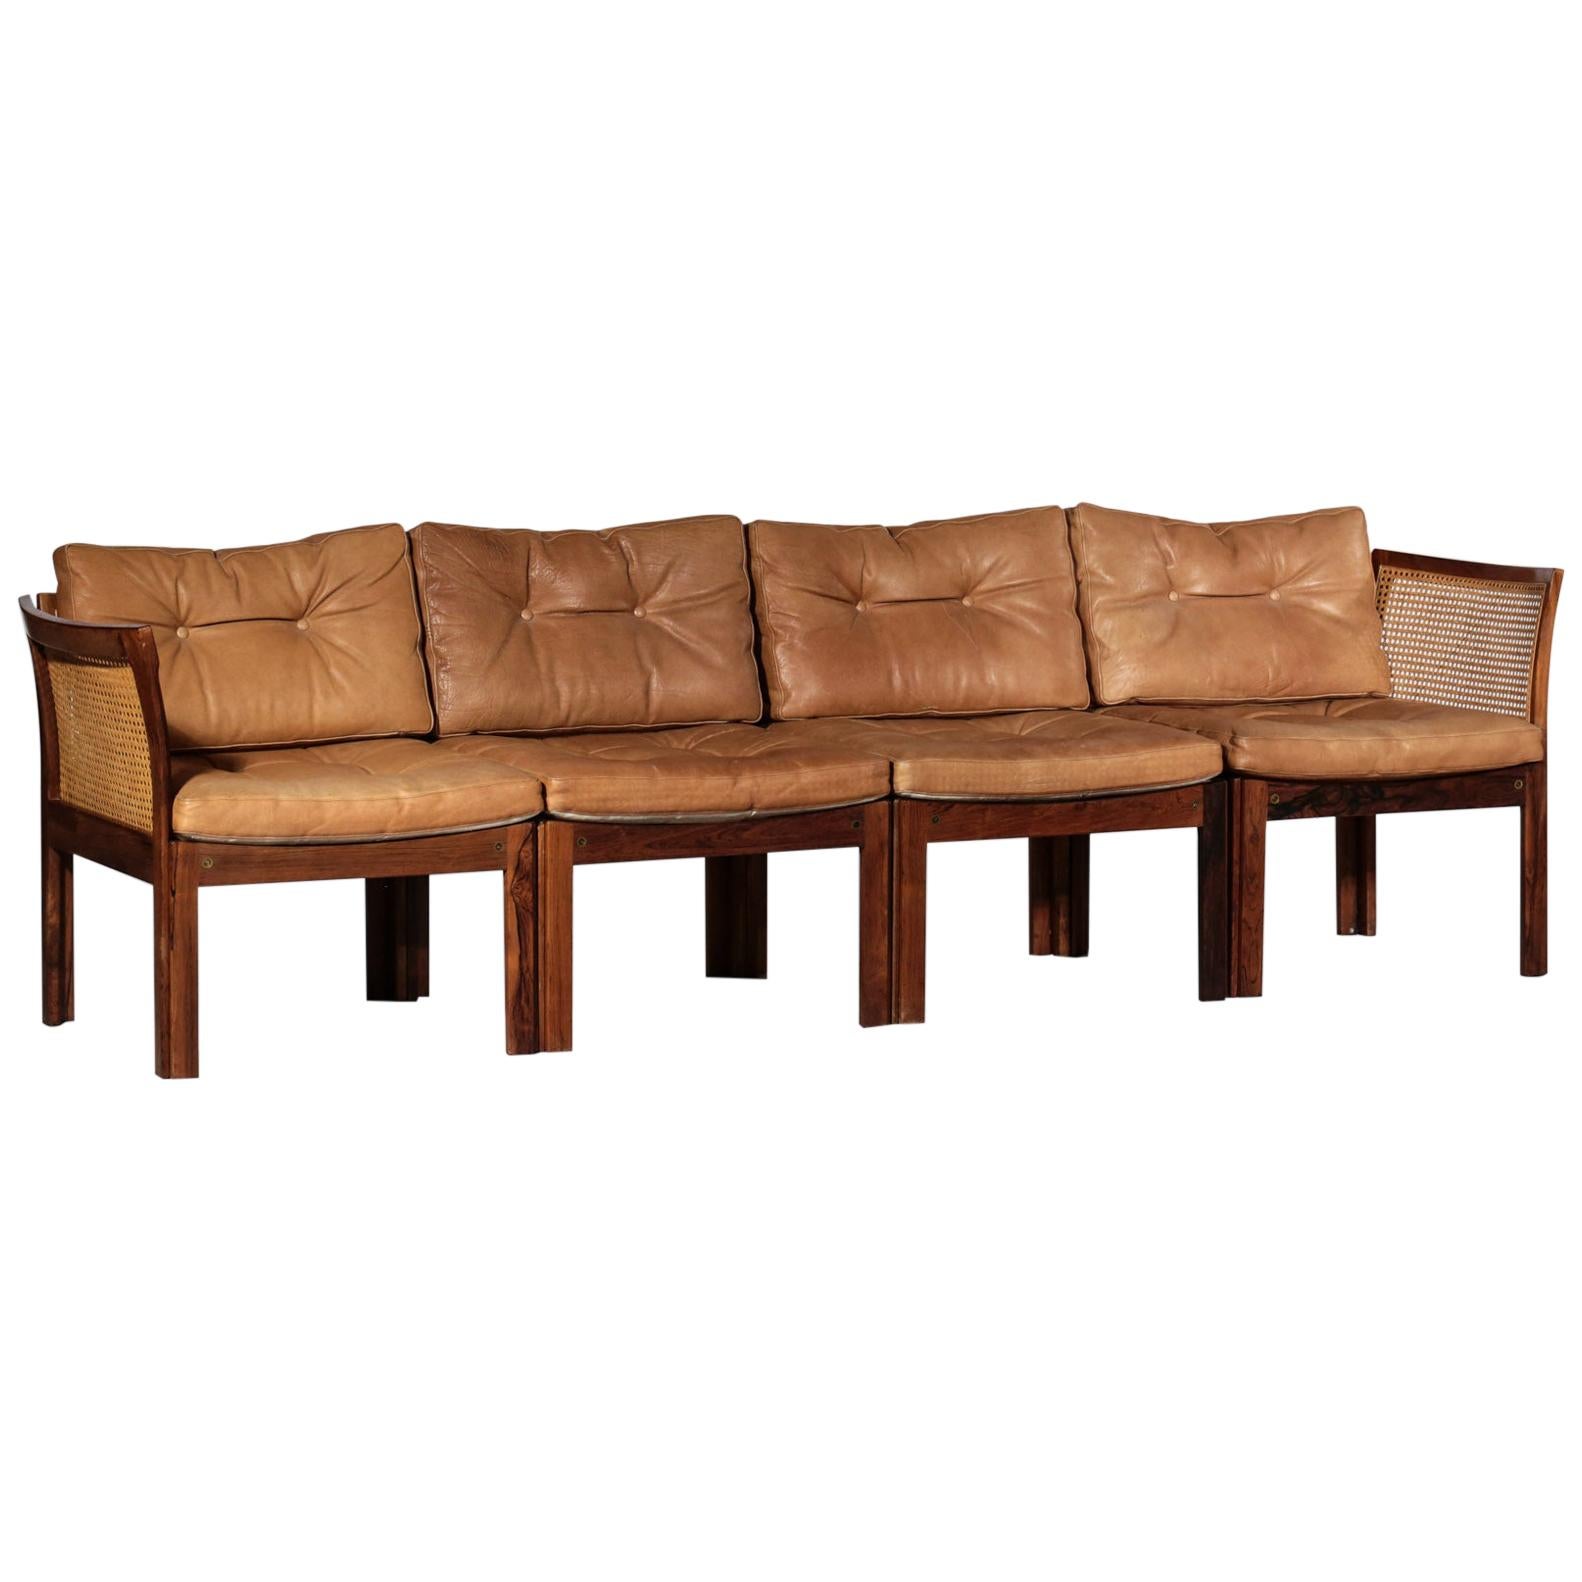 Illum Wikkelso Leather Sofa in Rosewood and Woven Rattan Cane